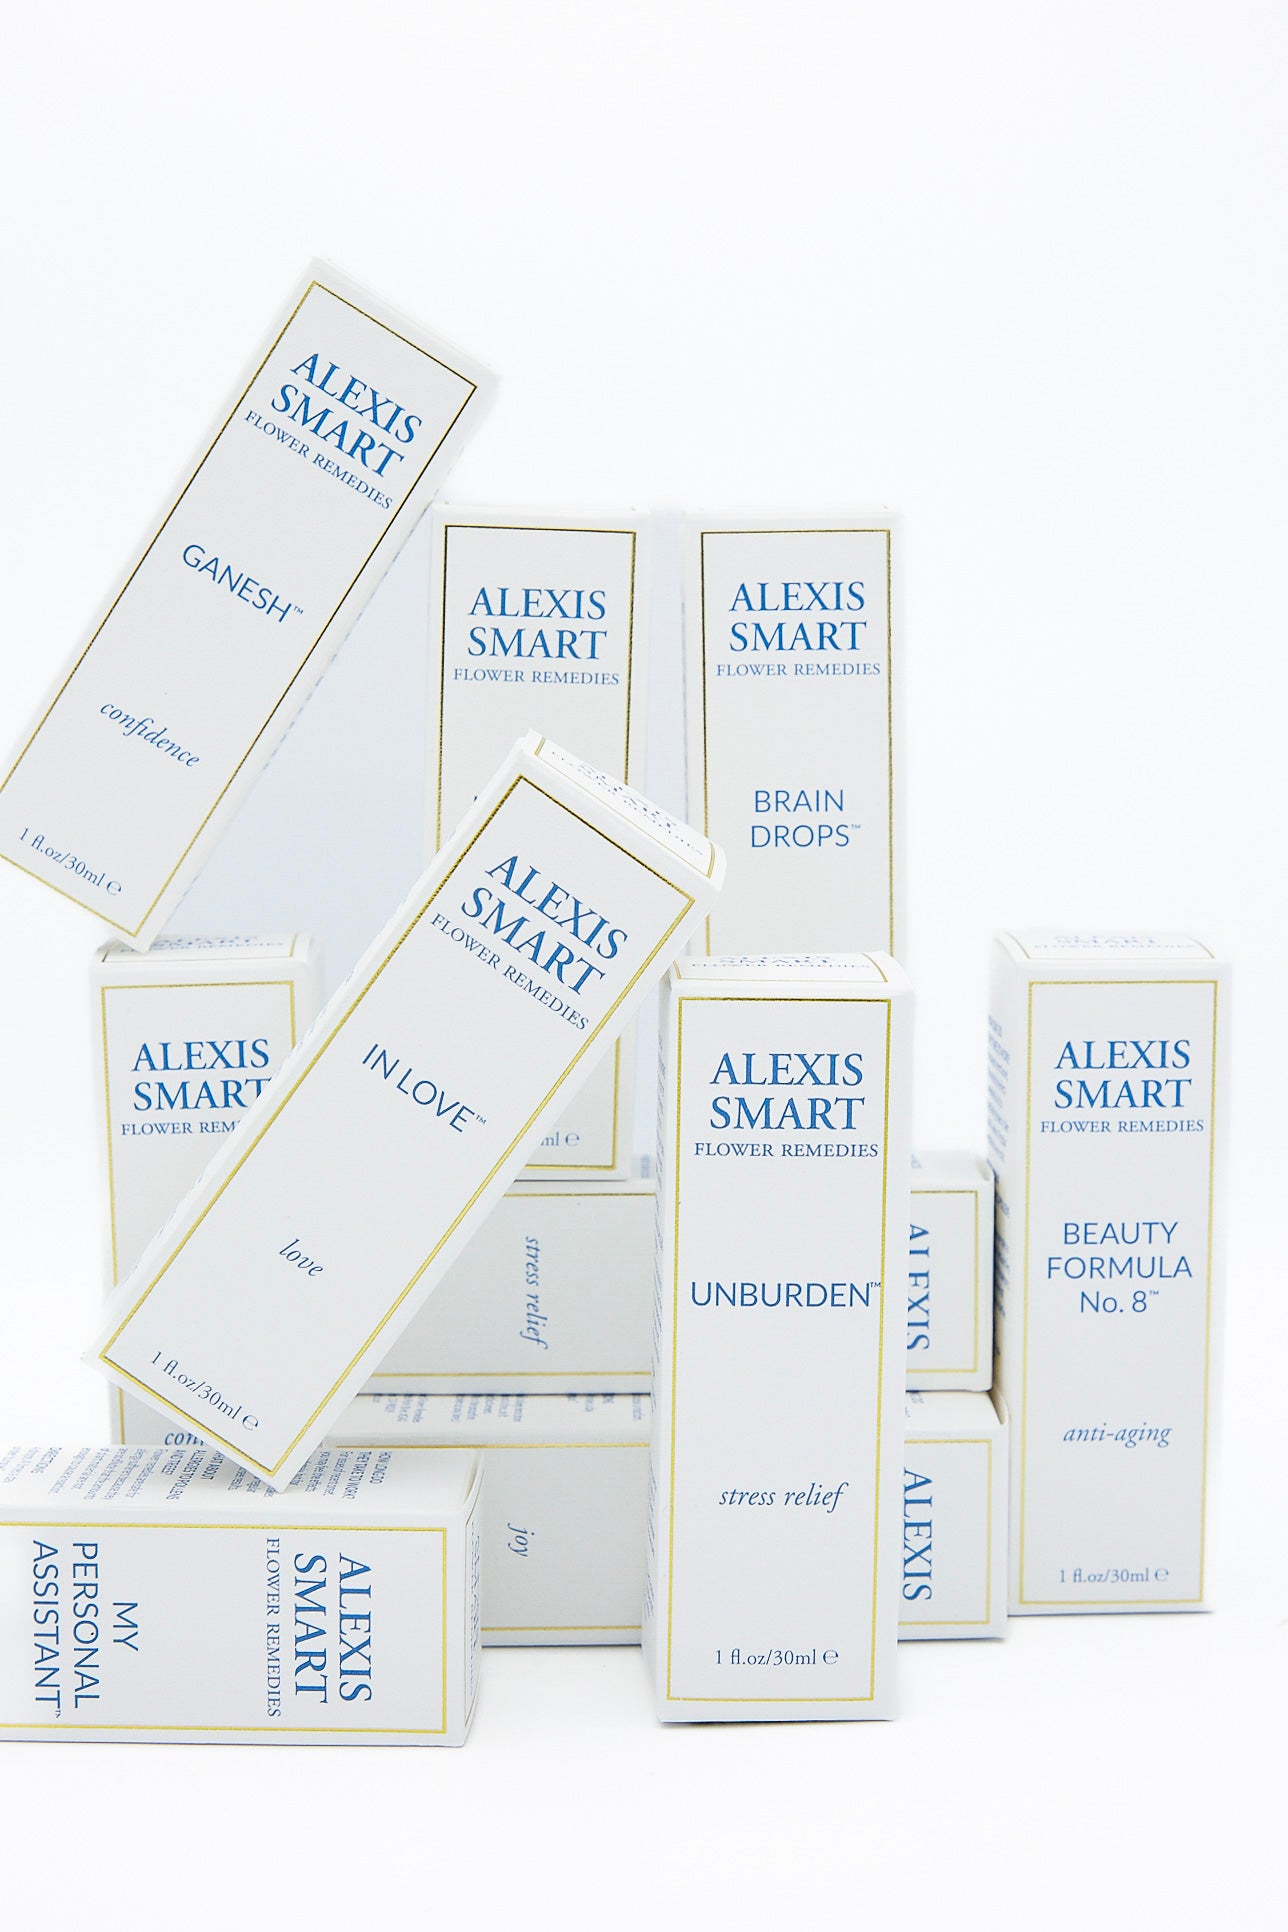 A tower of Flower Remedies - Brain Drops boxes requiring careful attention and focus to remember their arrangement. Brand Name: Alexis Smart